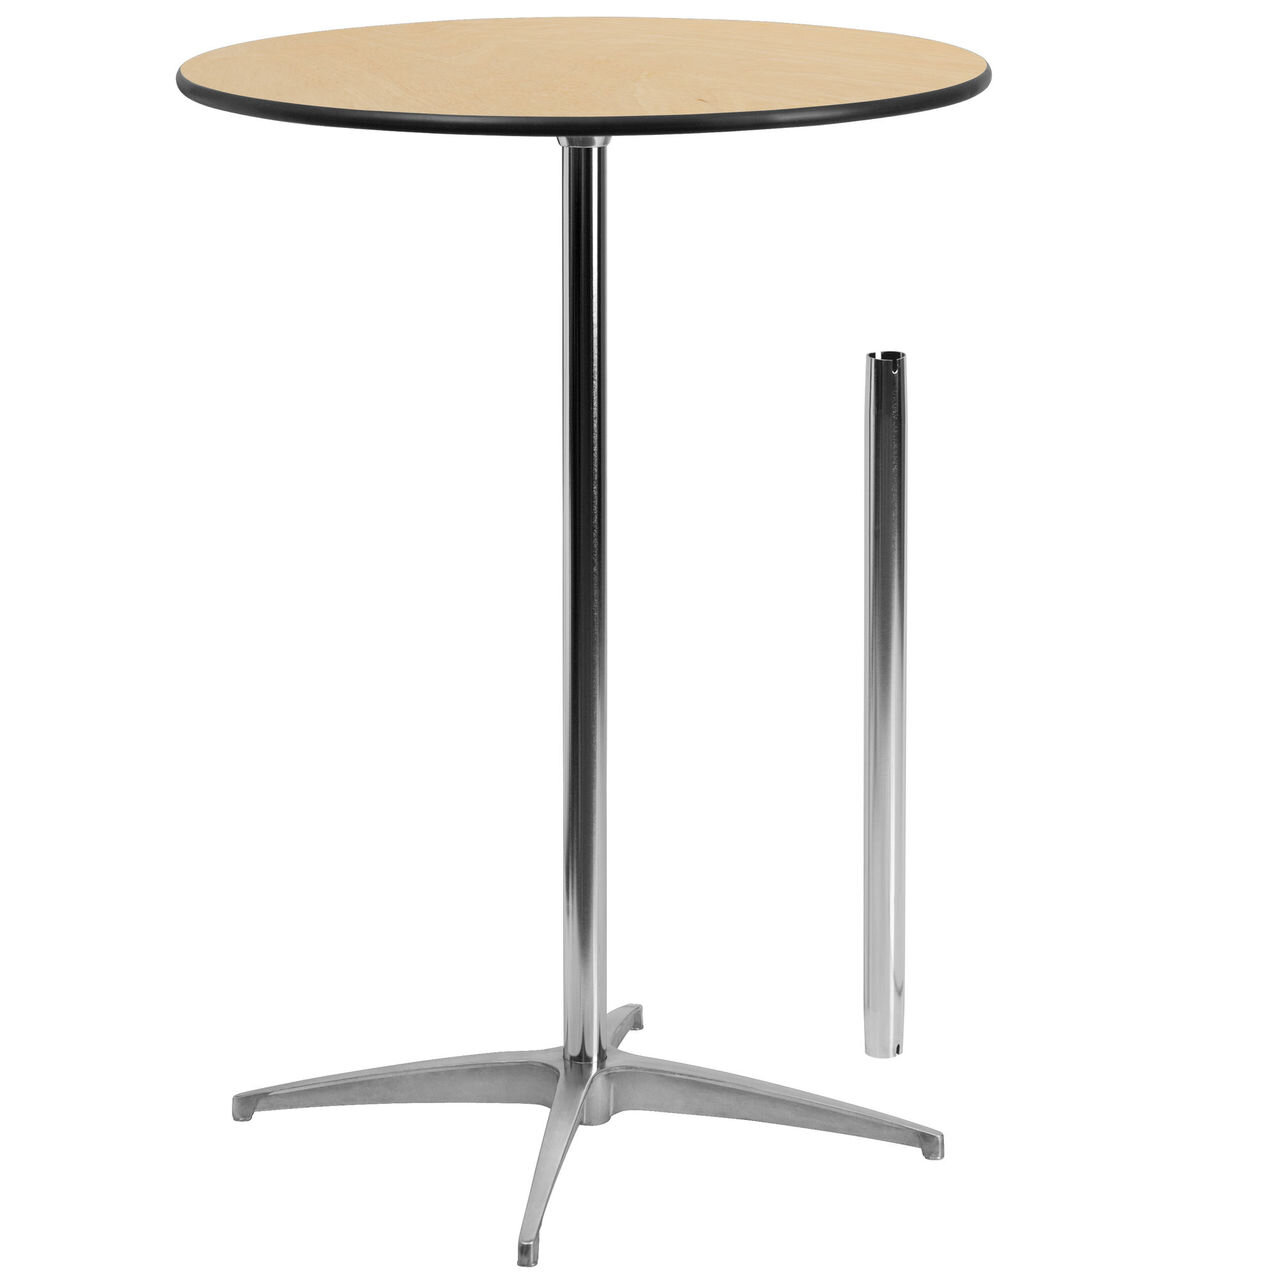 36in Round Cocktail Table $12.50